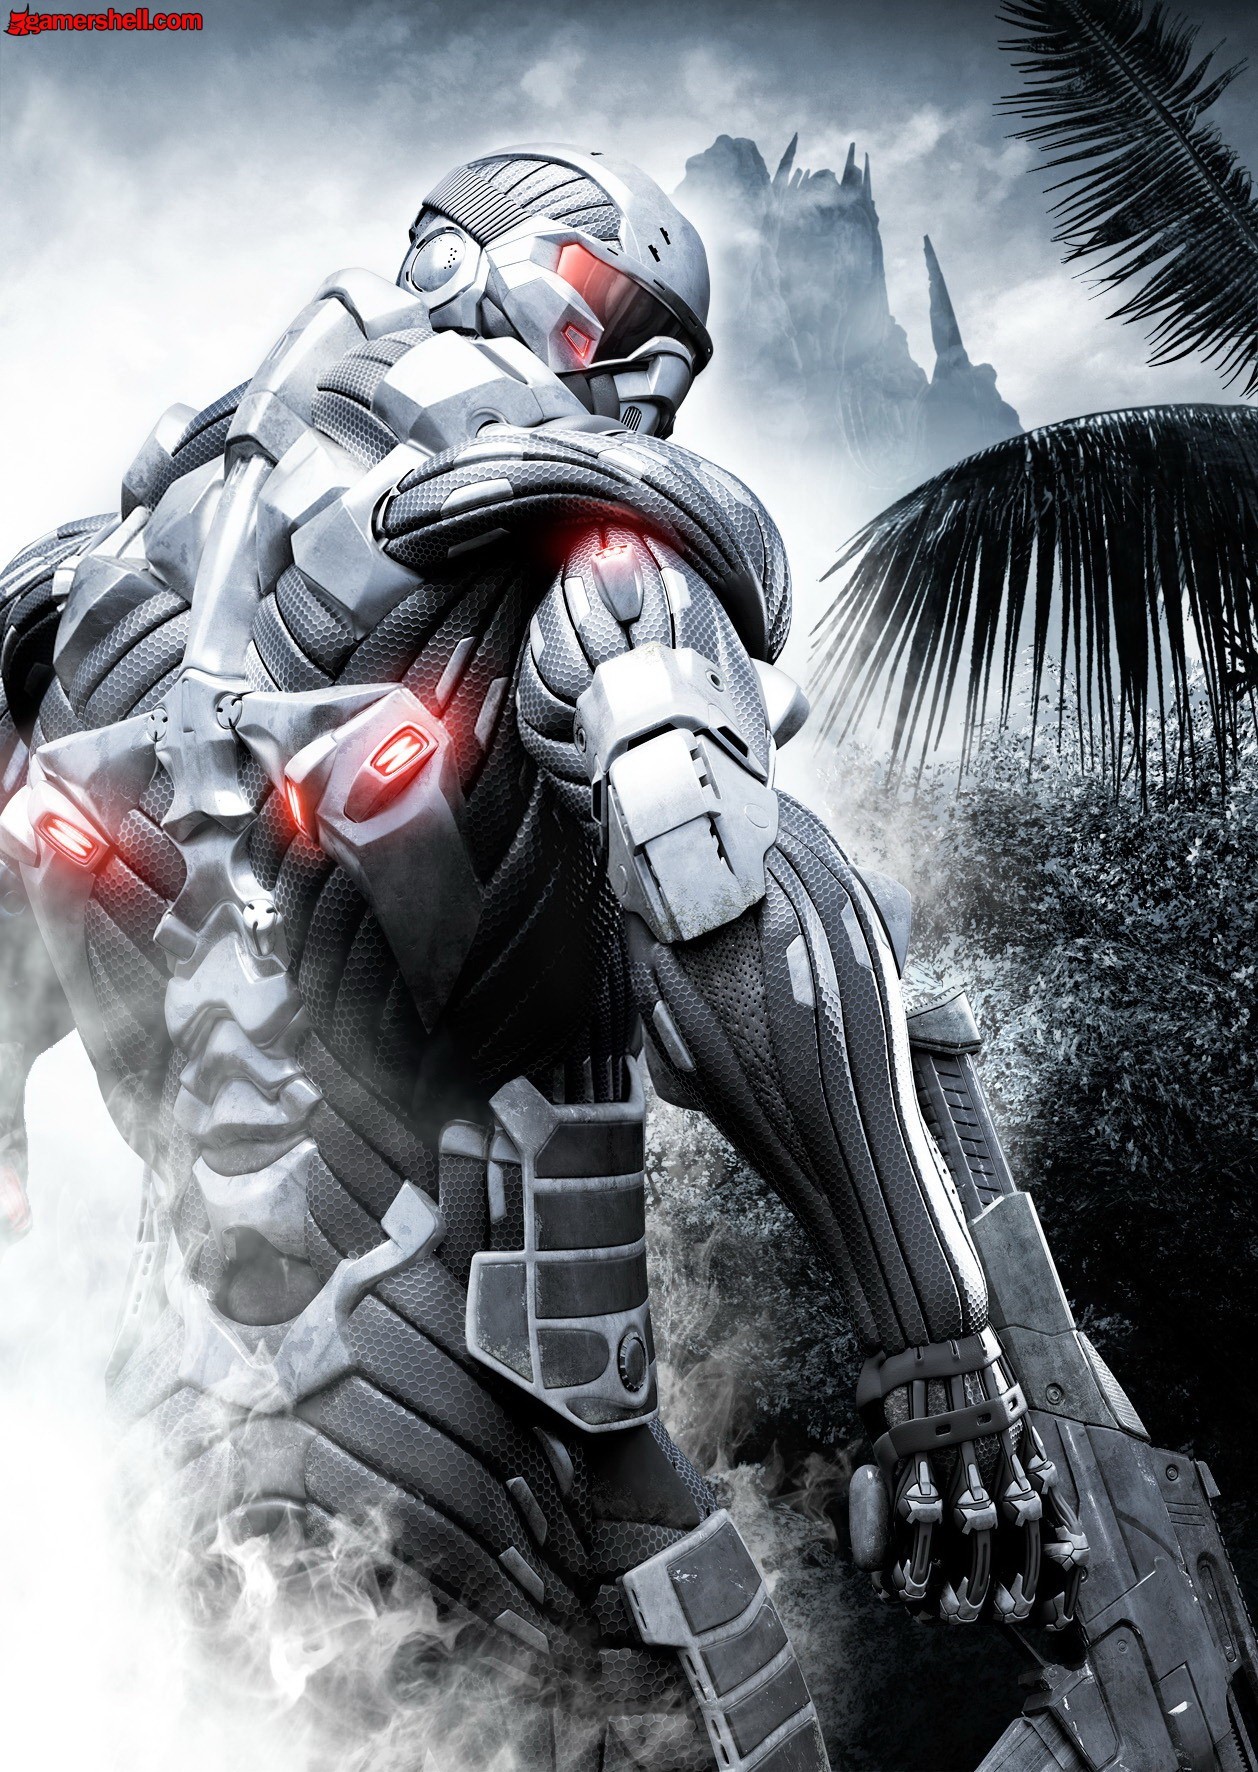 8463 Screensavers and Wallpapers Crysis for phone. Download crysis, games pictures for free